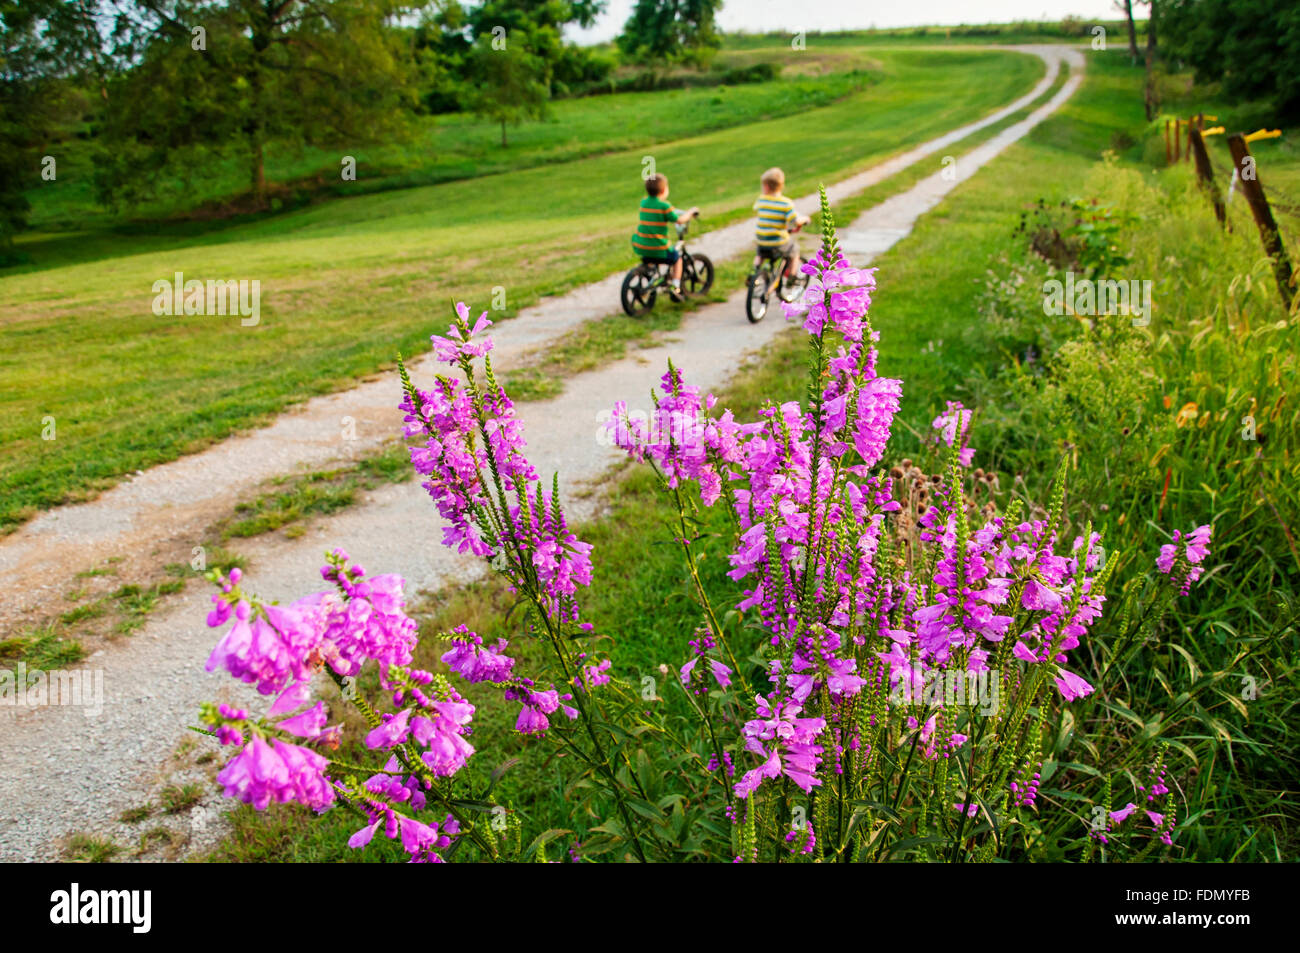 Two children riding bikes on country lane with purple wildflowers in foreground Stock Photo